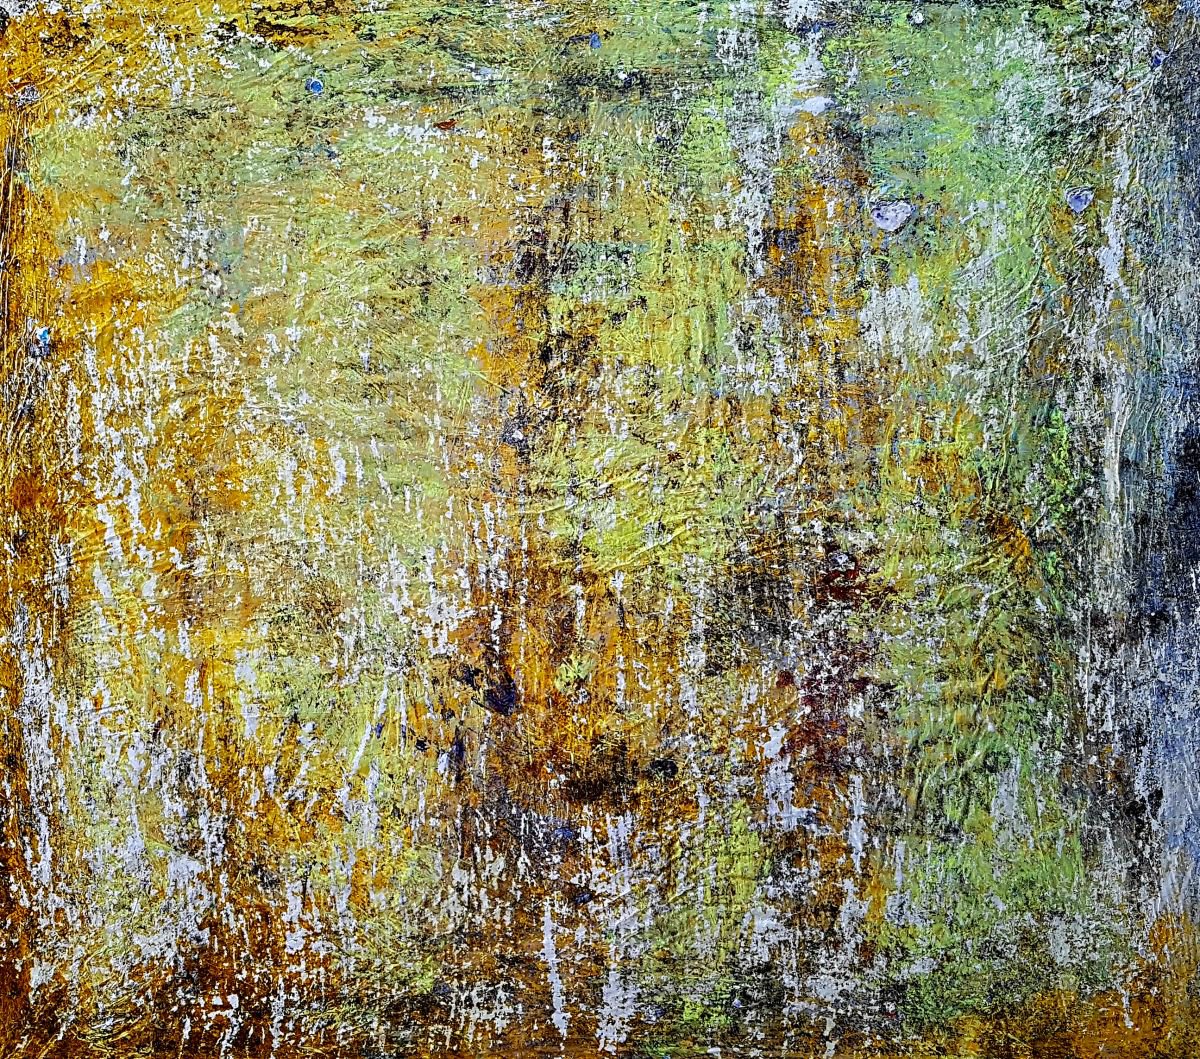 Lost in a wood (n.287) - 90 x 80 x 2,50 cm - ready to hang - acrylic painting on stretched... by Alessio Mazzarulli